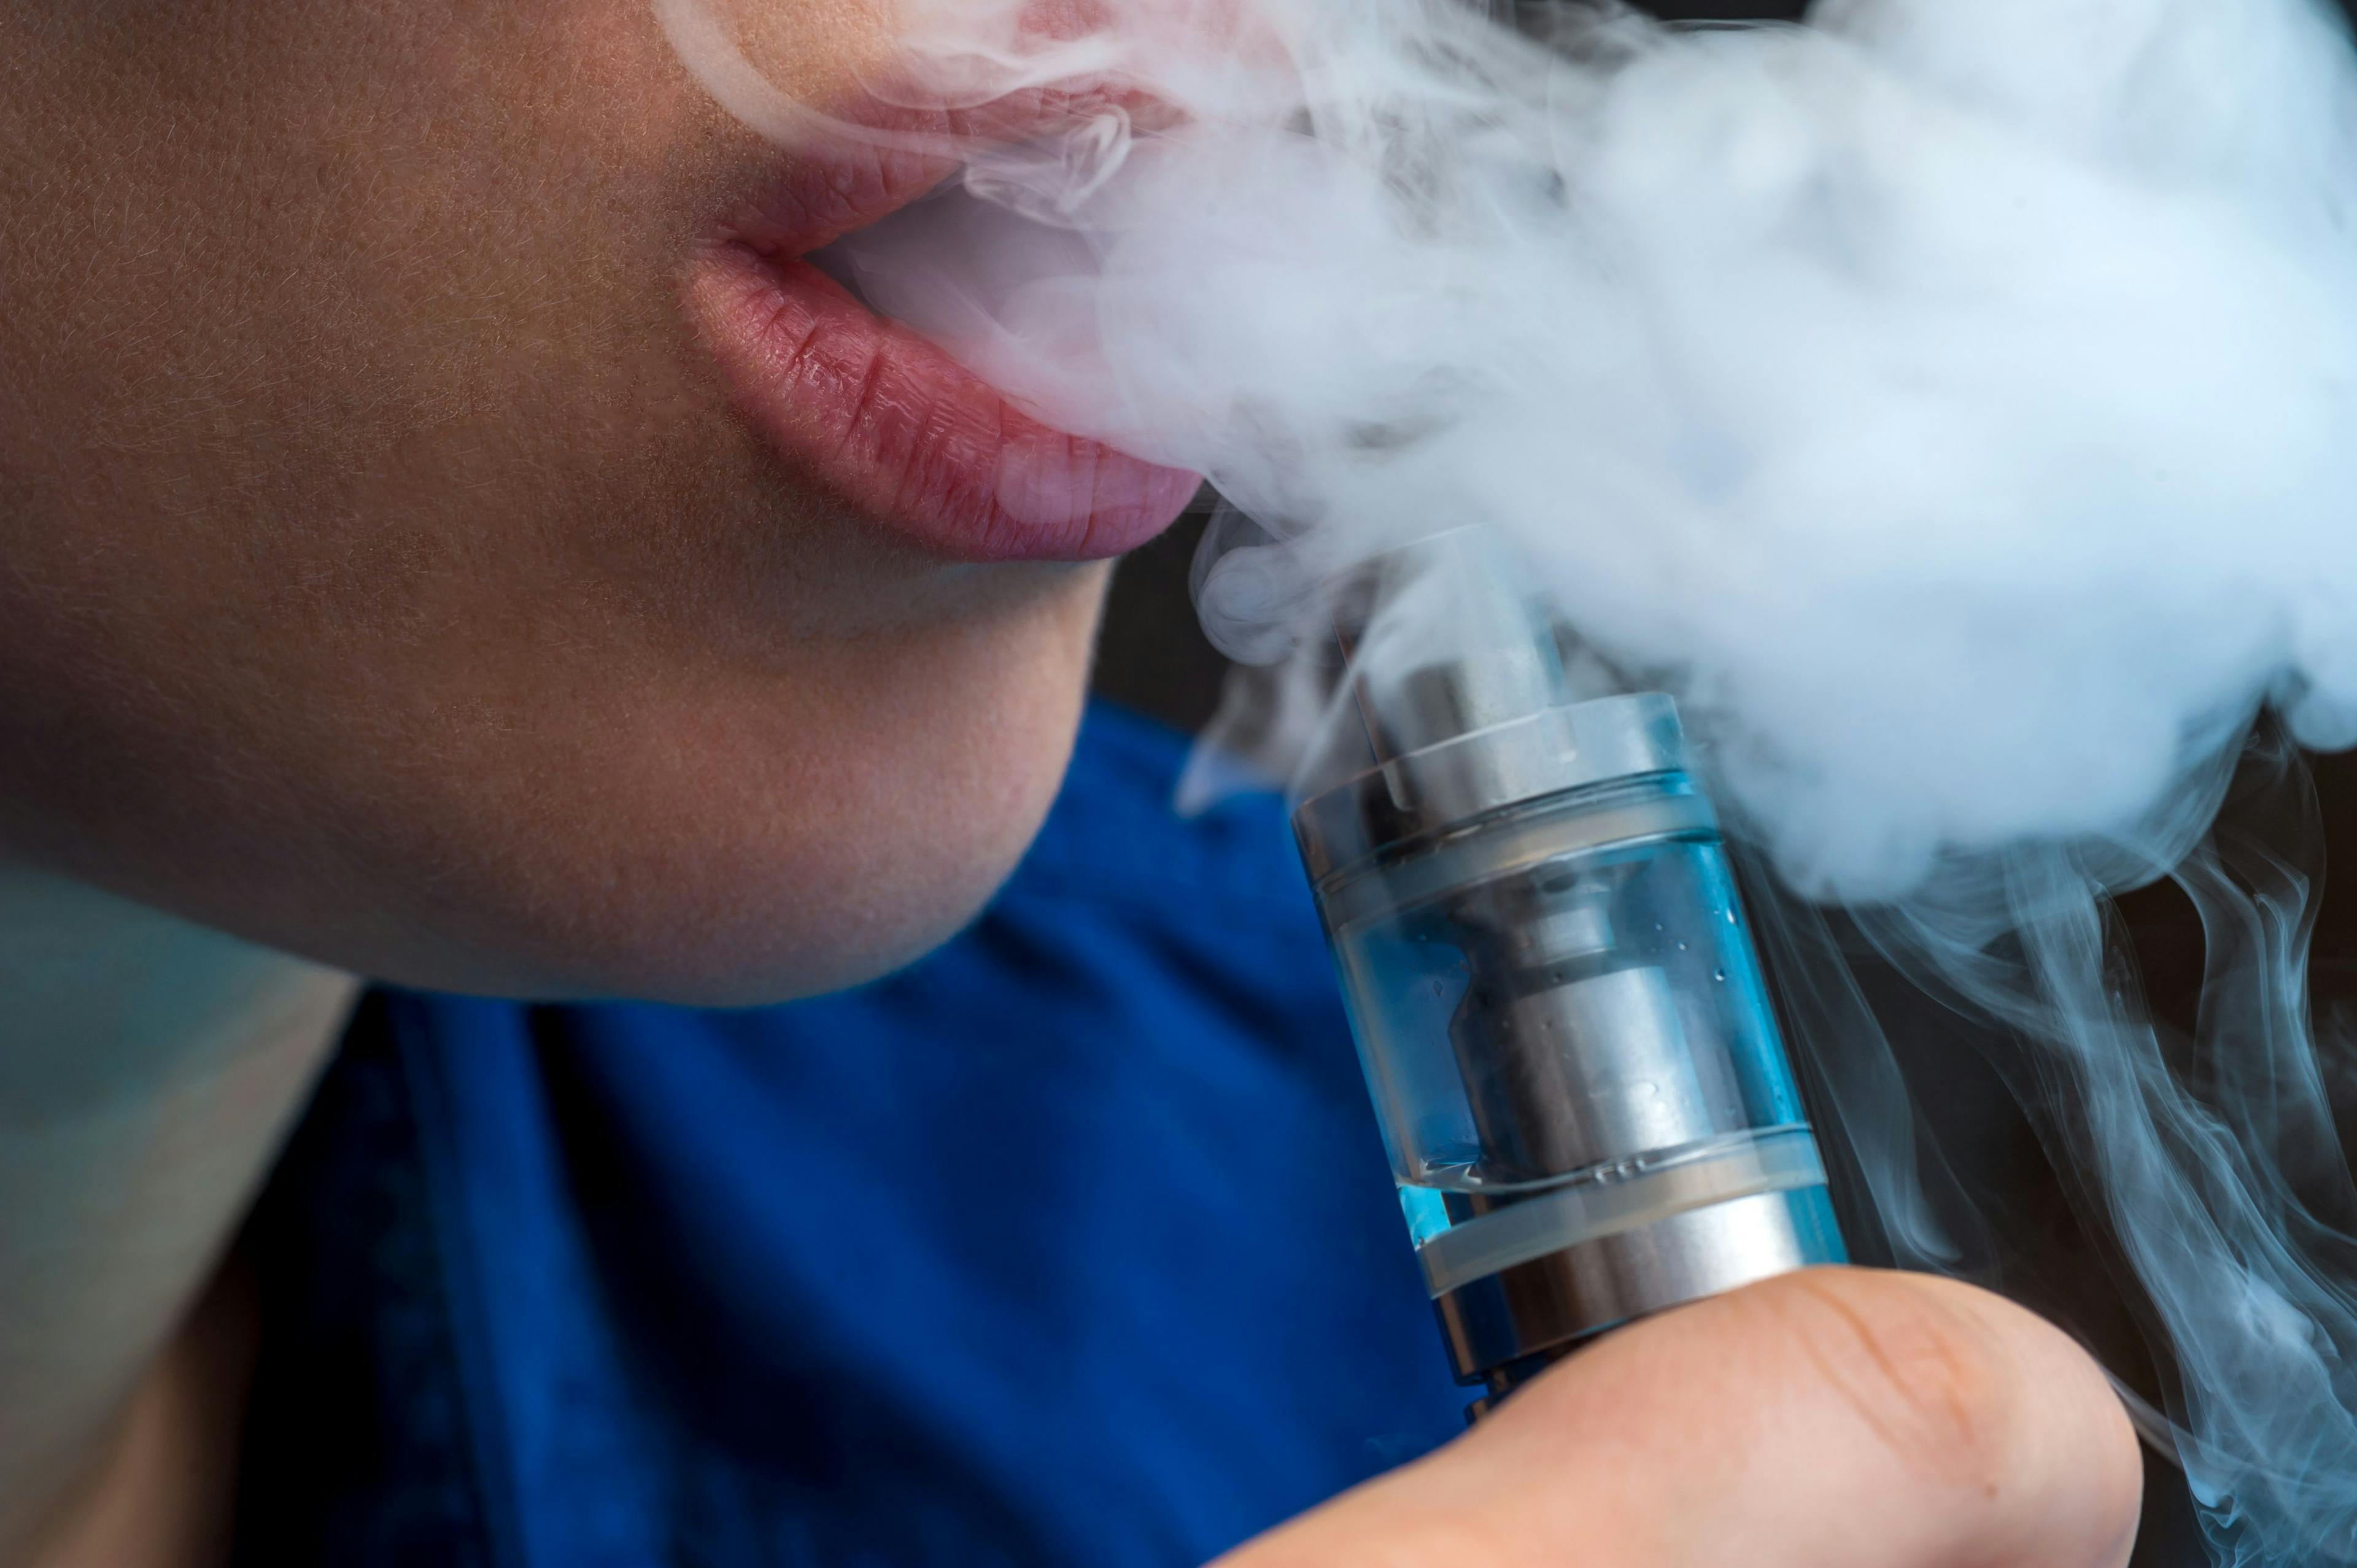 Sports participation increases vaping risk among high school students